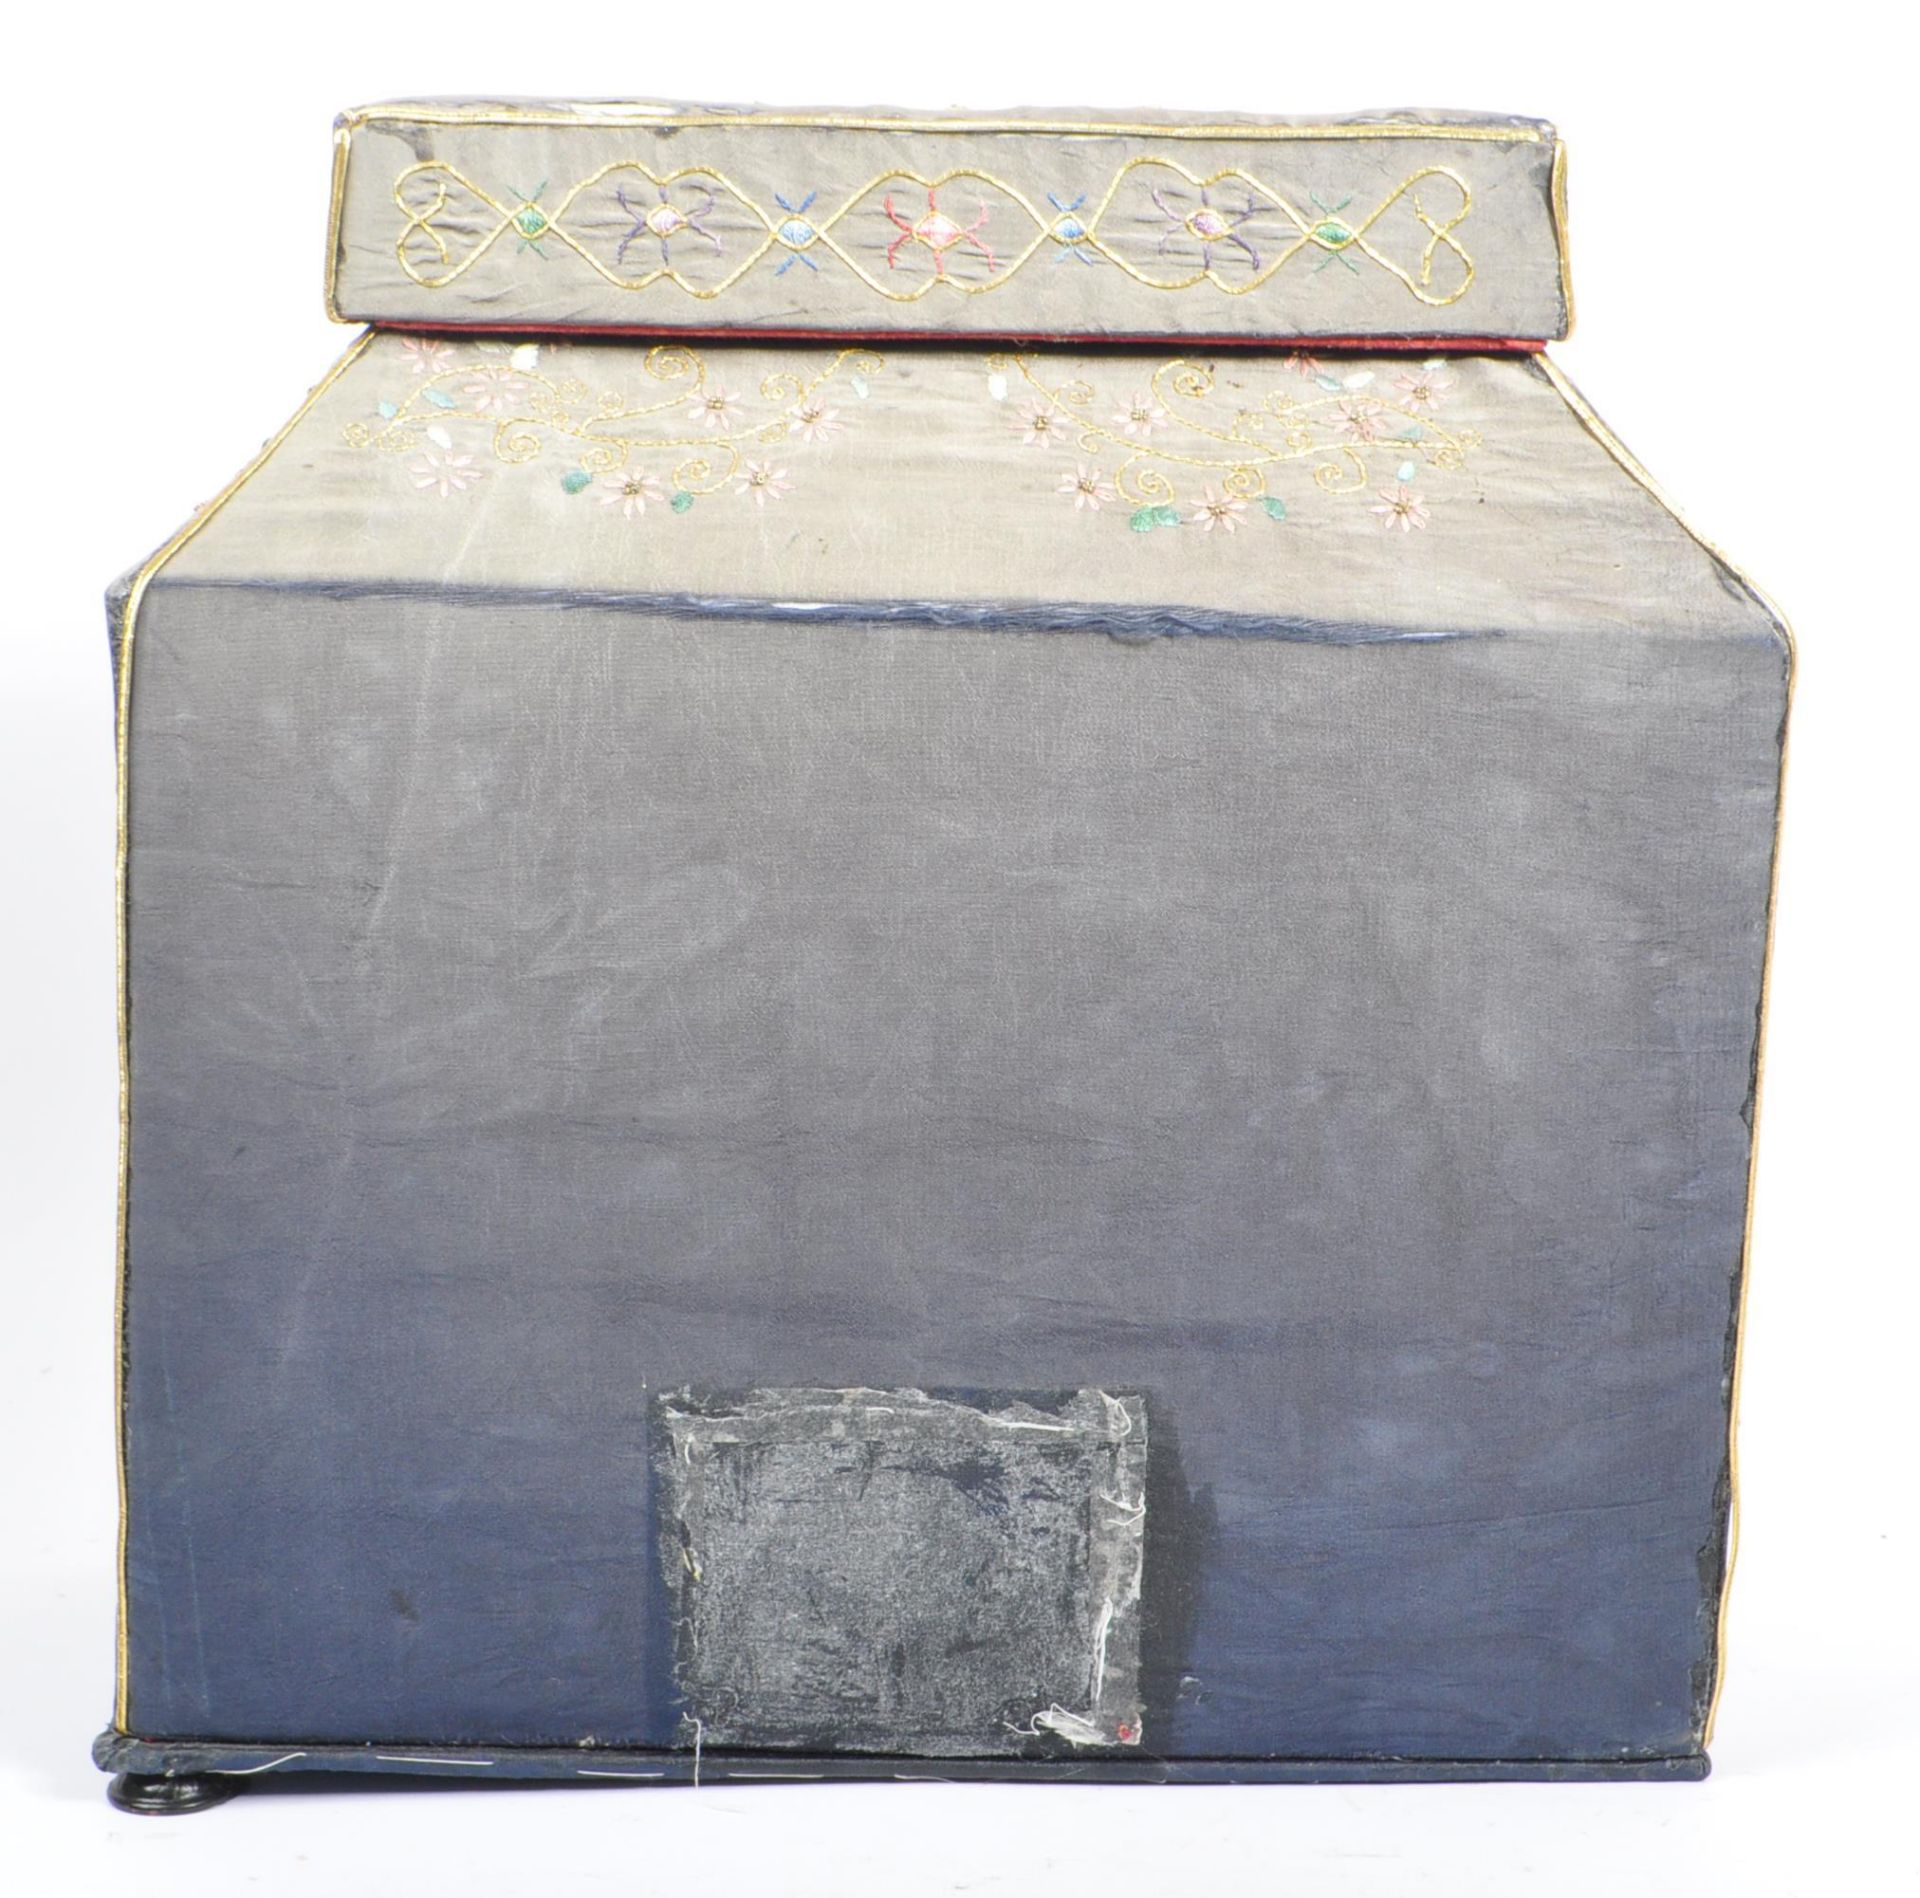 EARLY 20TH CENTURY 1920S CHINESE EMBROIDERED PEKING SEWING BOX - Image 6 of 10